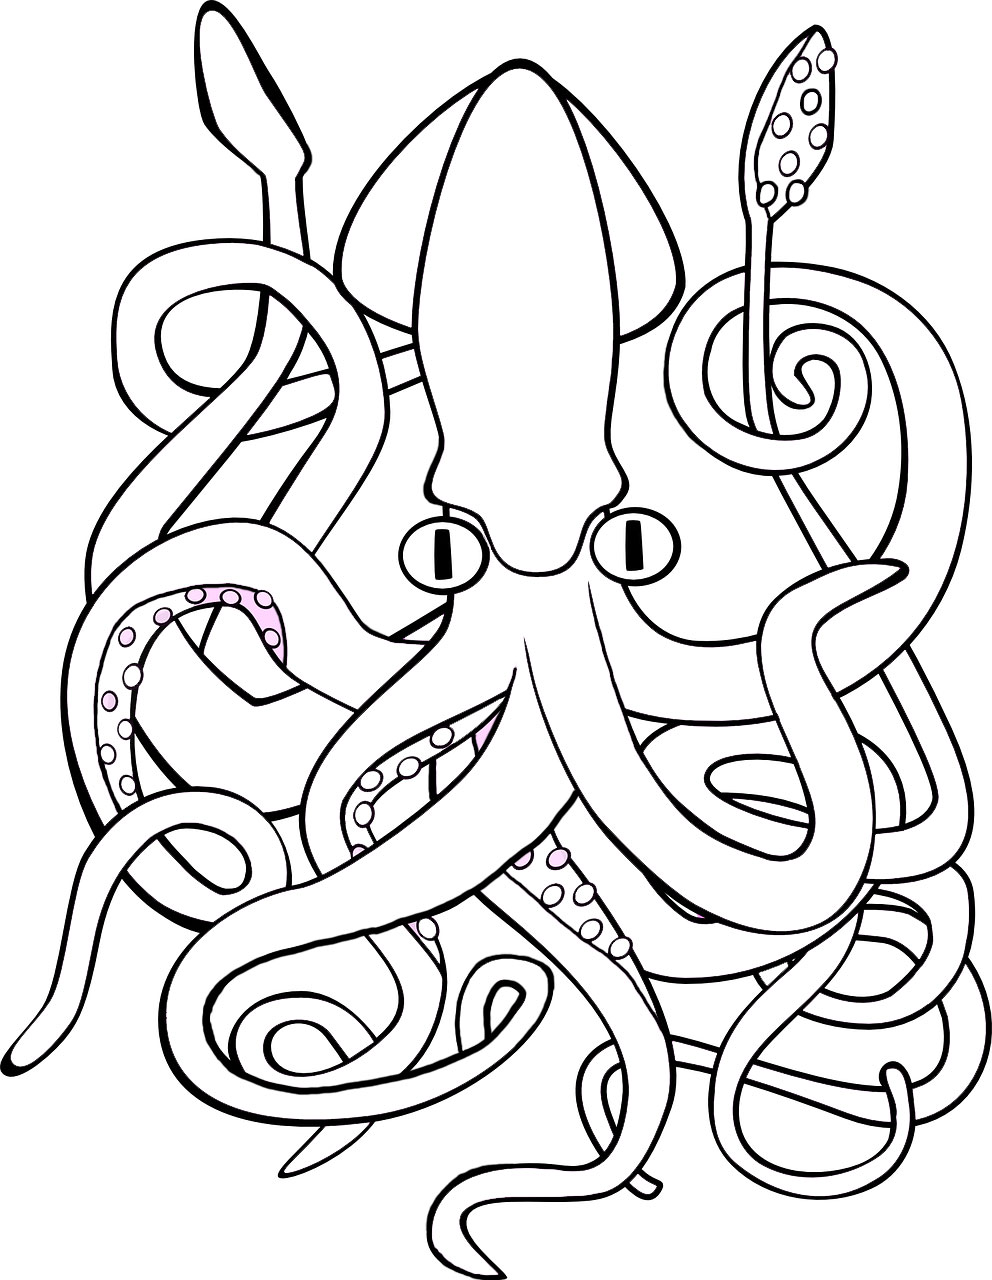 Printable colouring page of a giant squid